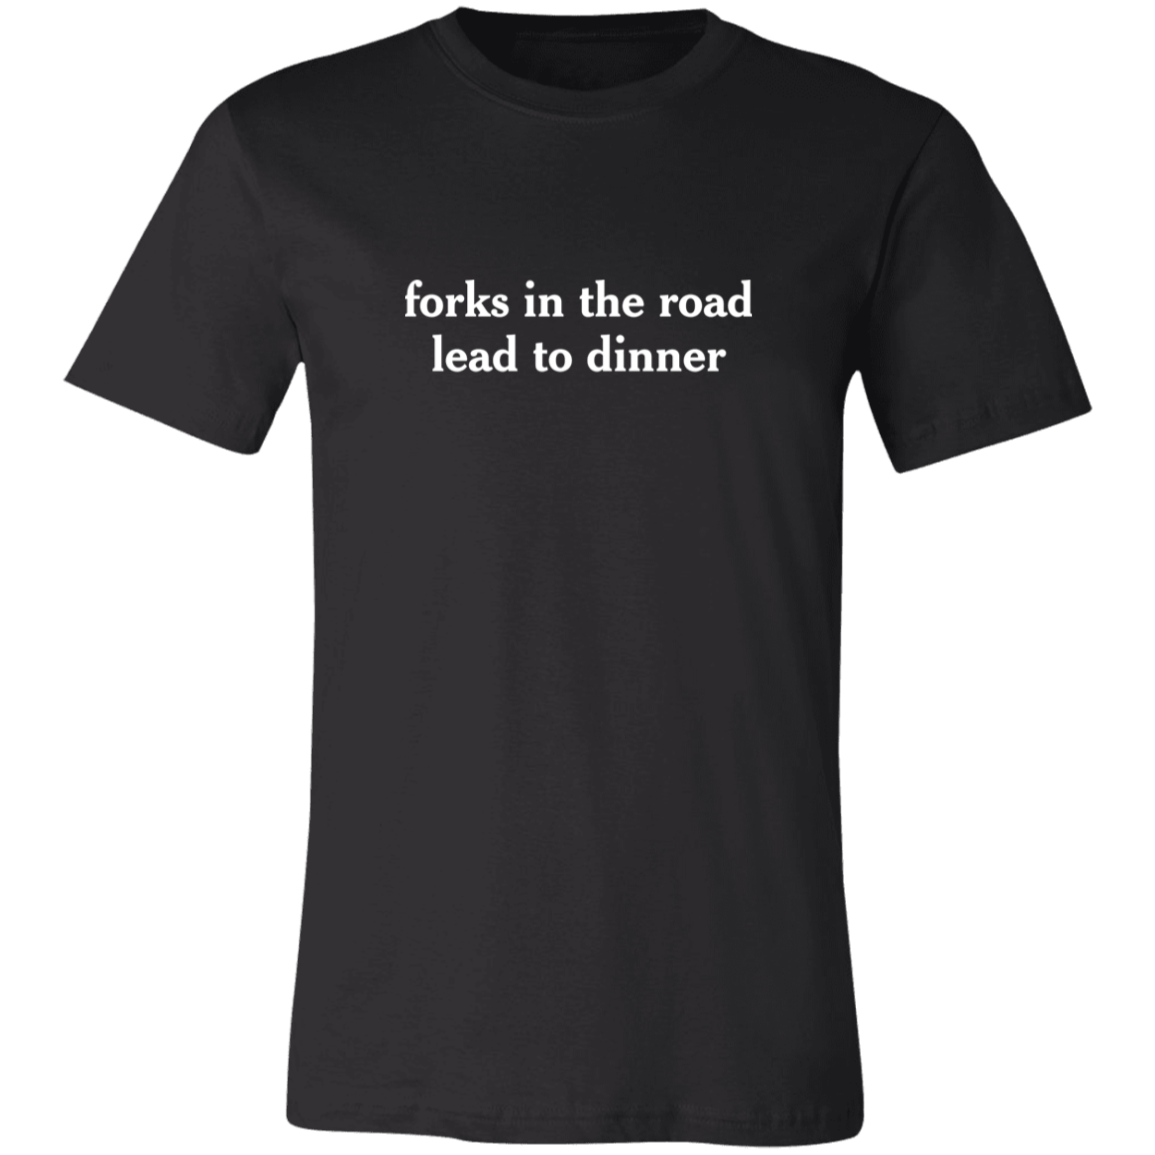 forks in the road lead to dinner tee